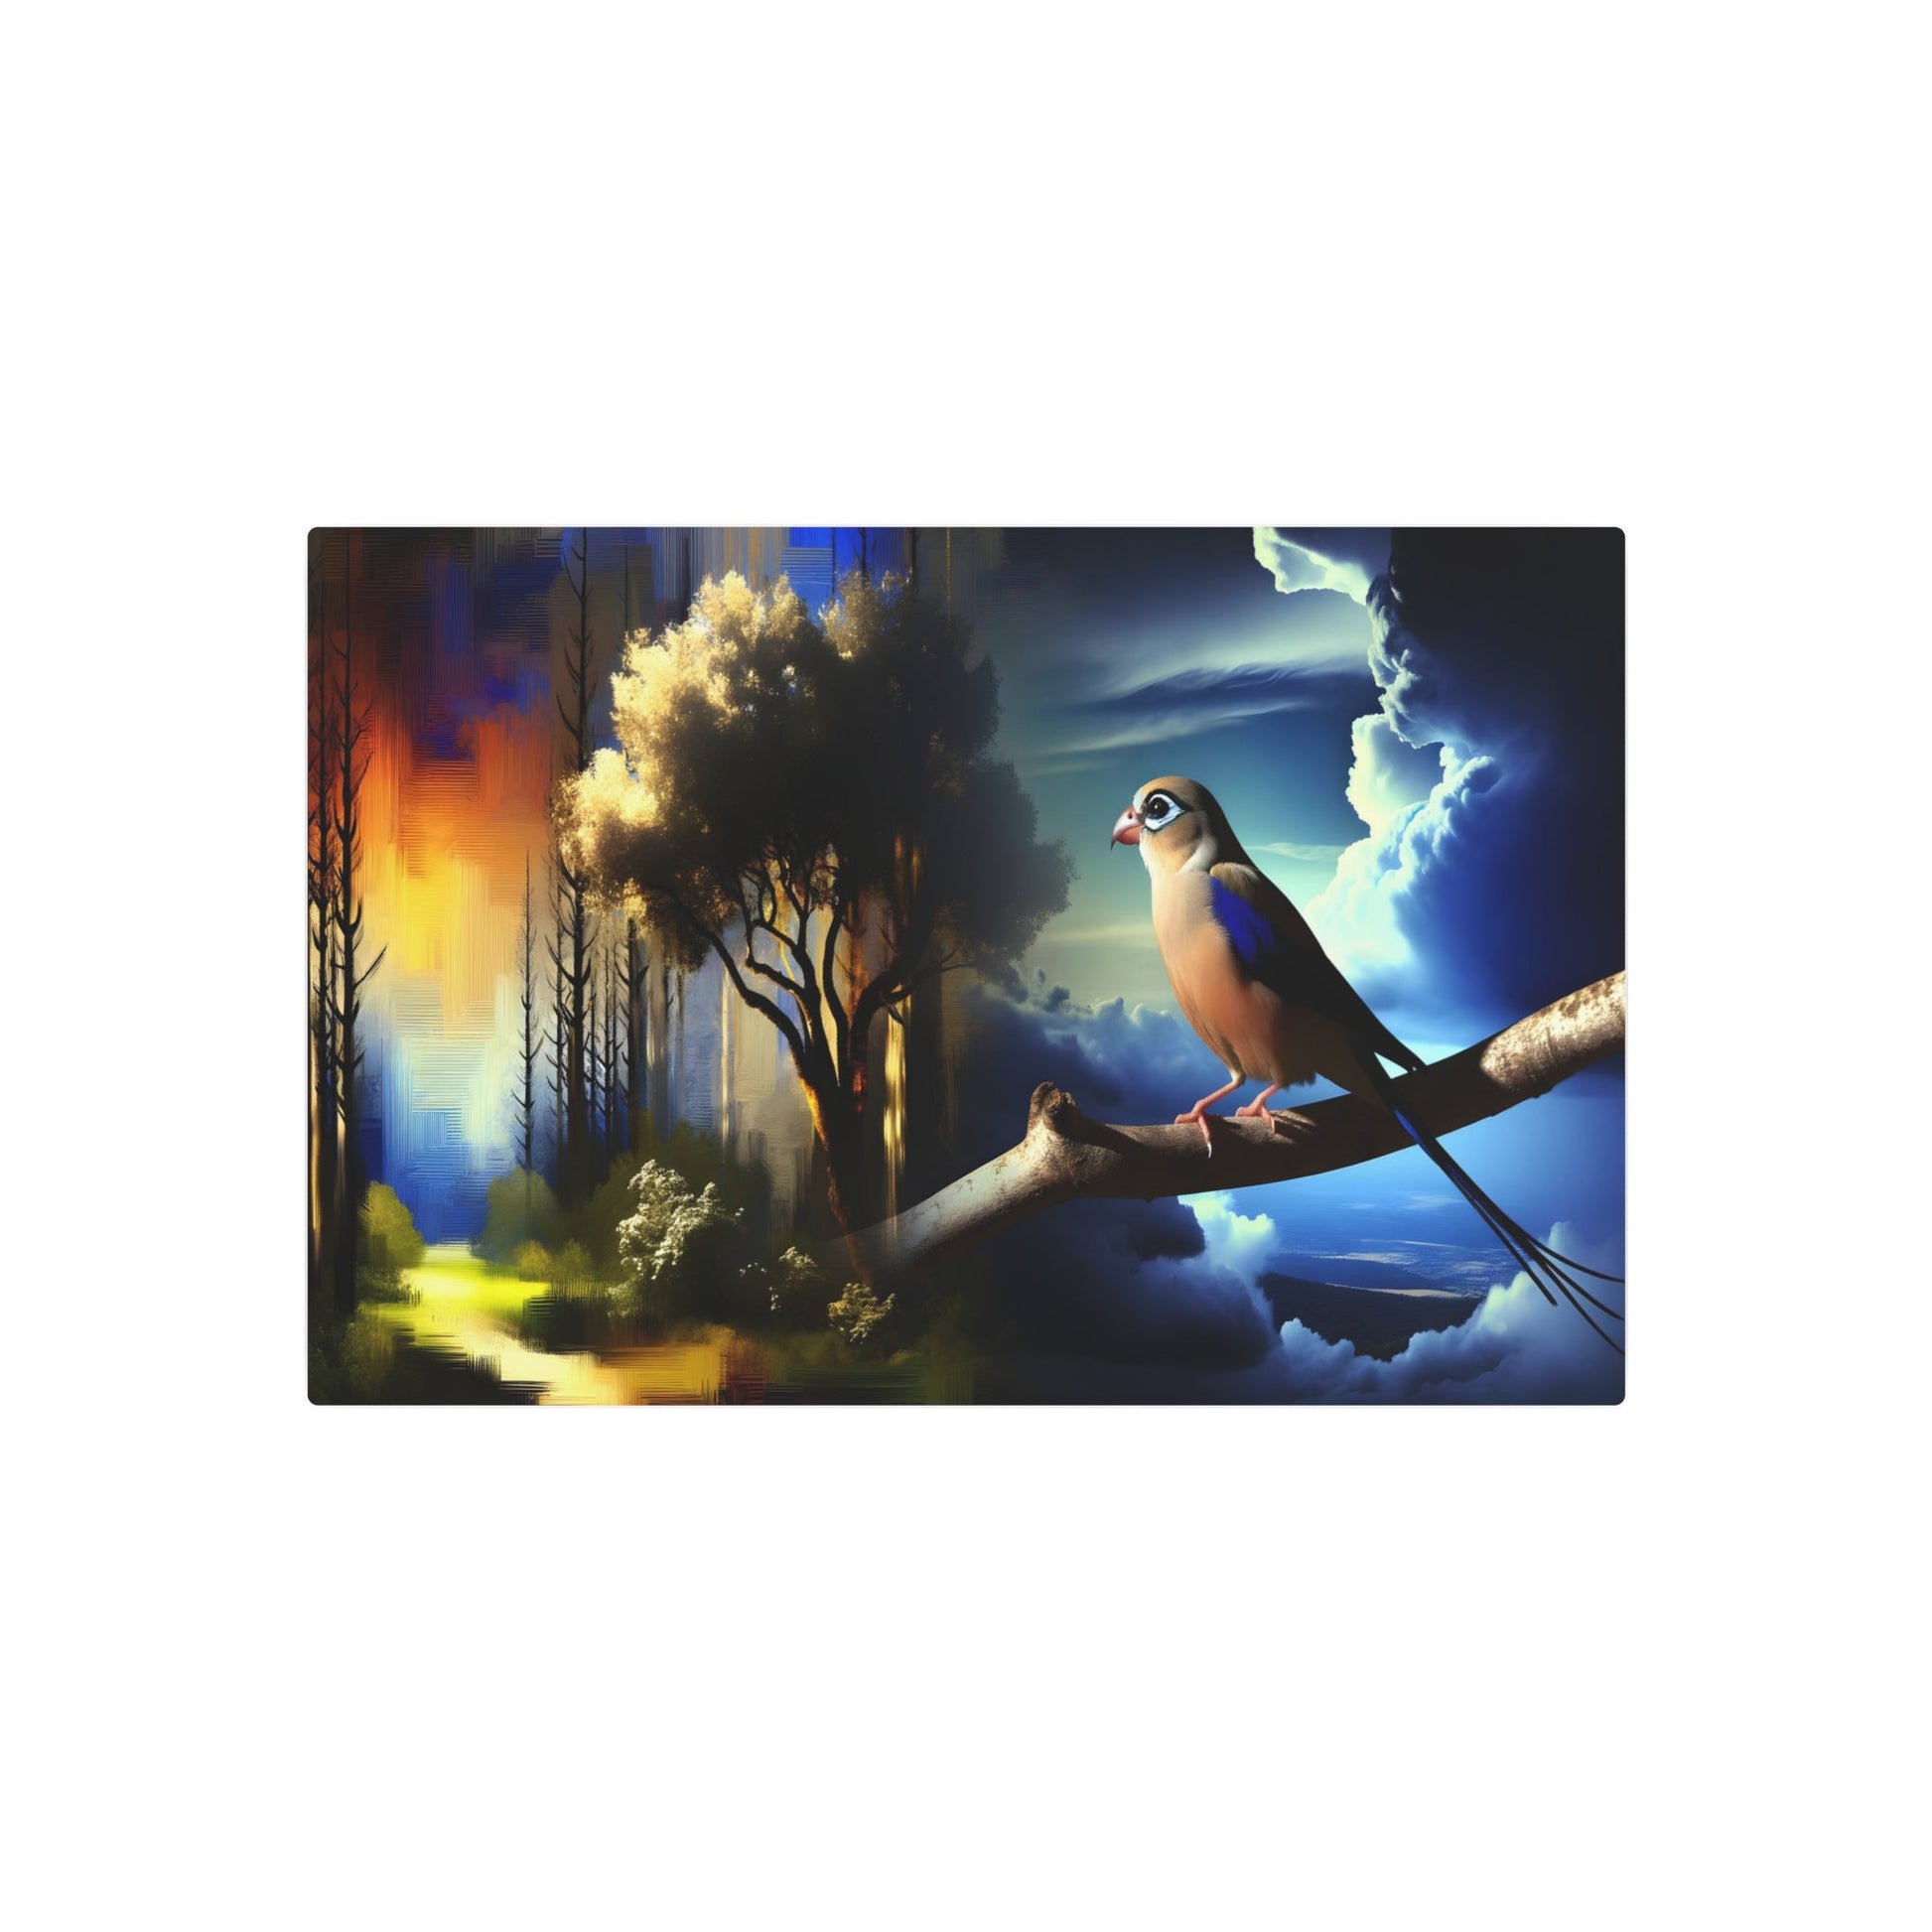 Metal Poster Art | "Romanticism-Style Western Art - Dramatic Bird Scene with Intense Emotion and Sublime Nature Contrast" - Metal Poster Art 30″ x 20″ (Horizontal) 0.12''